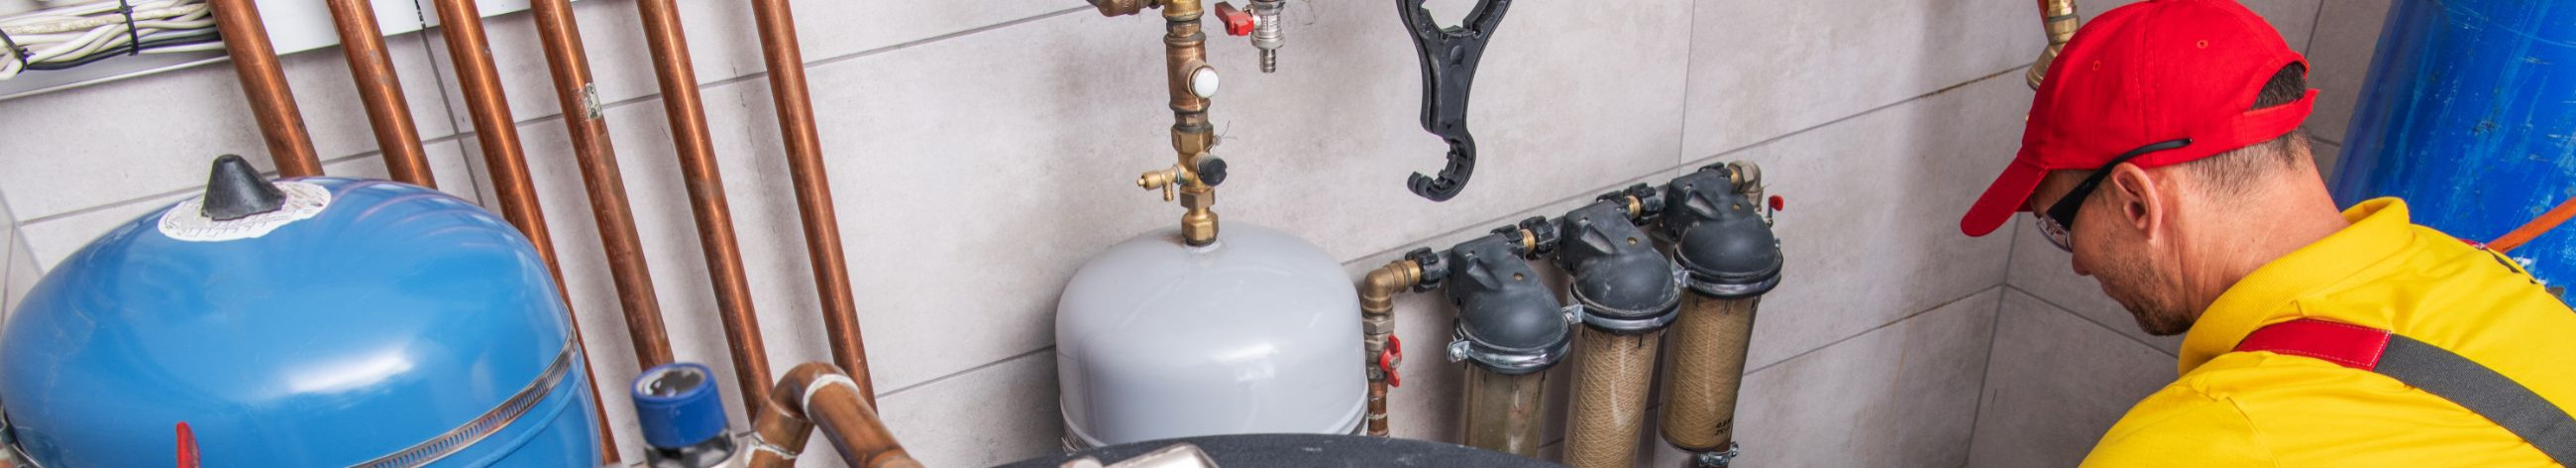 We specialize in heating, water supply systems, and pipework services.